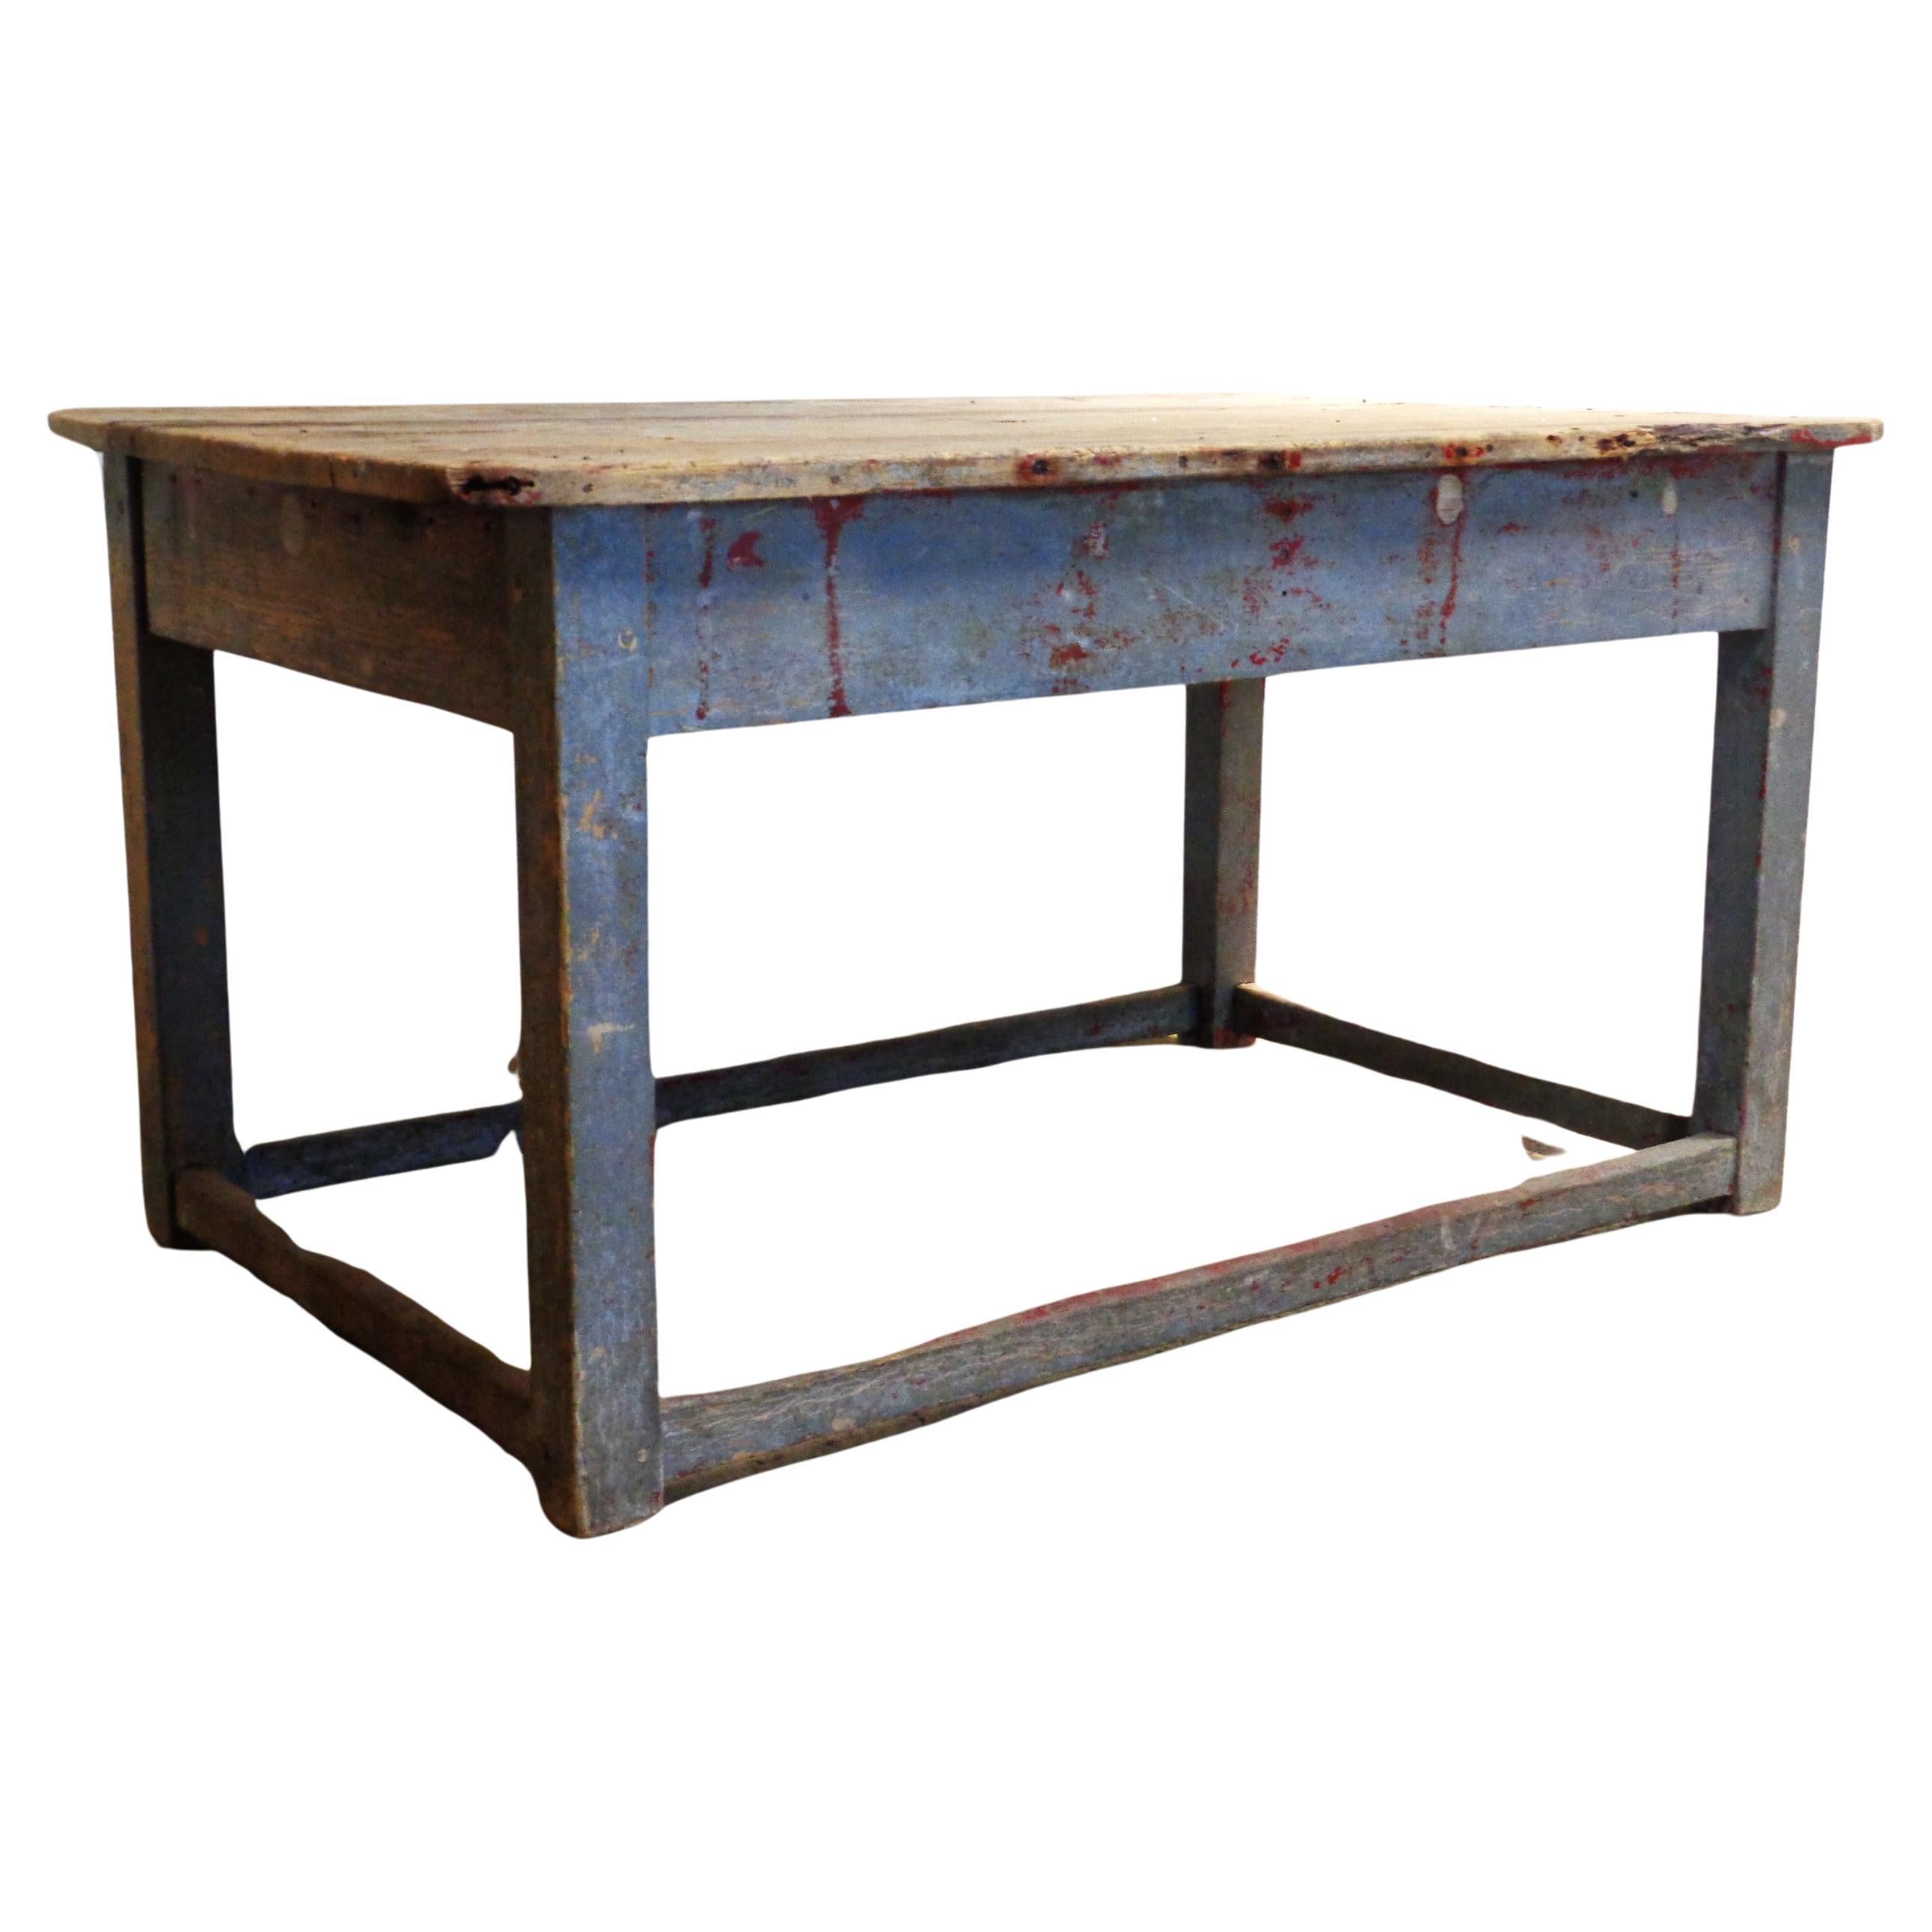  Early 19th Century Original Blue Painted Rustic Work Table  For Sale